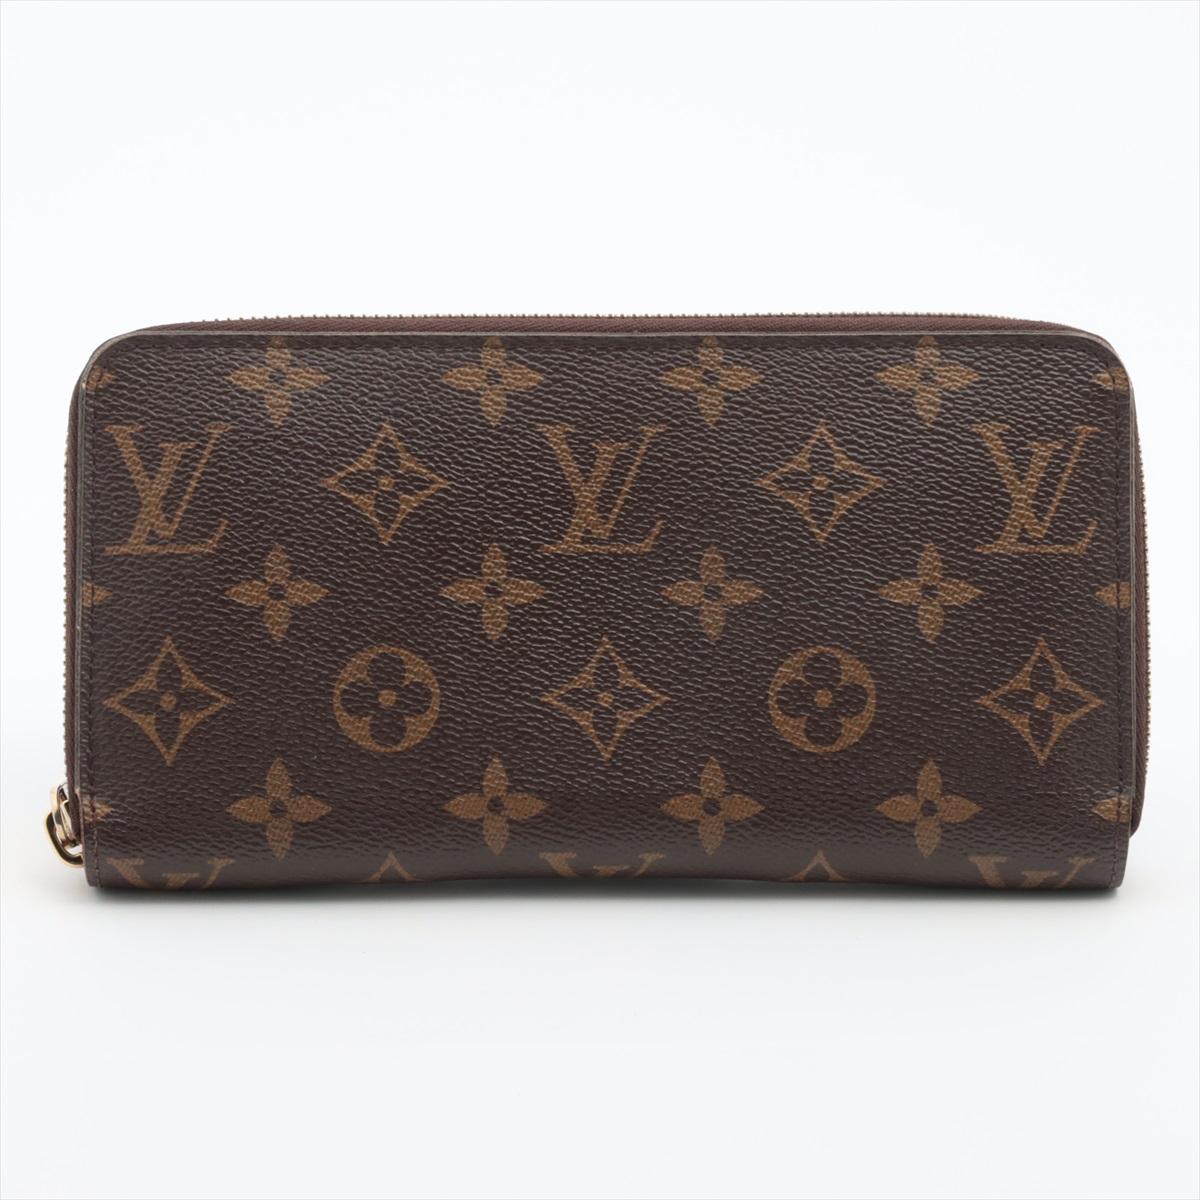 The Louis Vuitton Monogram Zippy Wallet is a timeless and sophisticated accessory that combines style with practicality. The wallet showcases the iconic Louis Vuitton Monogram canvas, featuring the classic LV initials and floral motif pattern. The